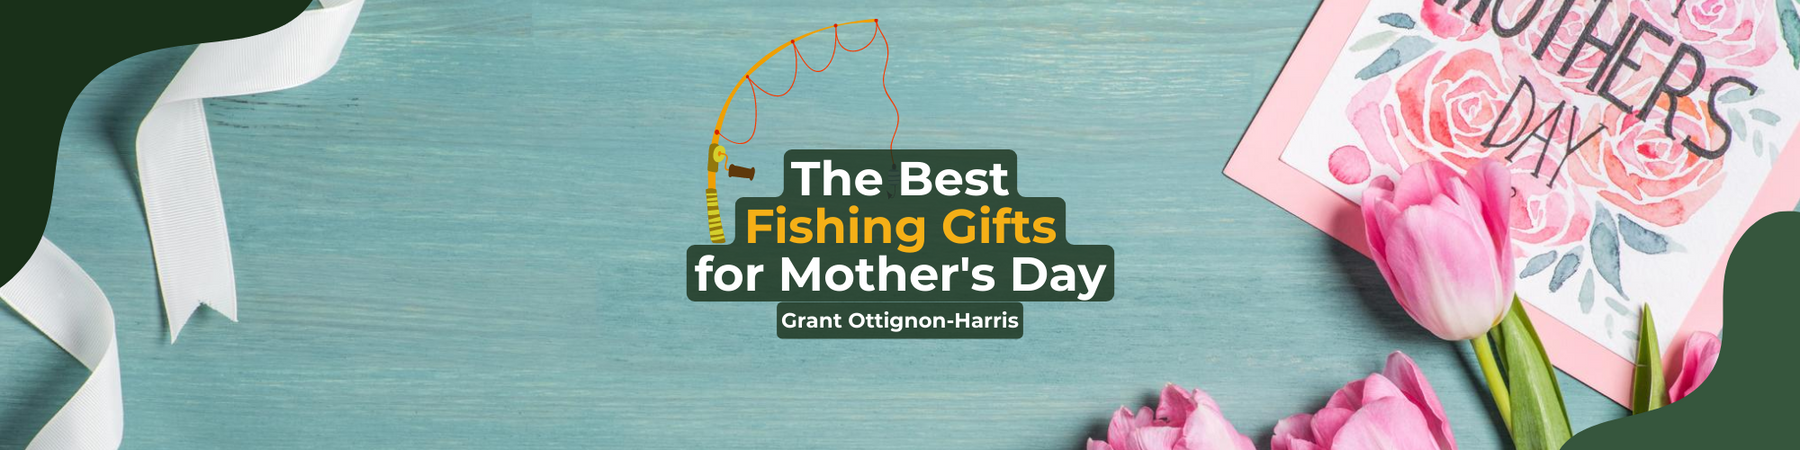 The Best Fishing Gifts for Mother’s Day